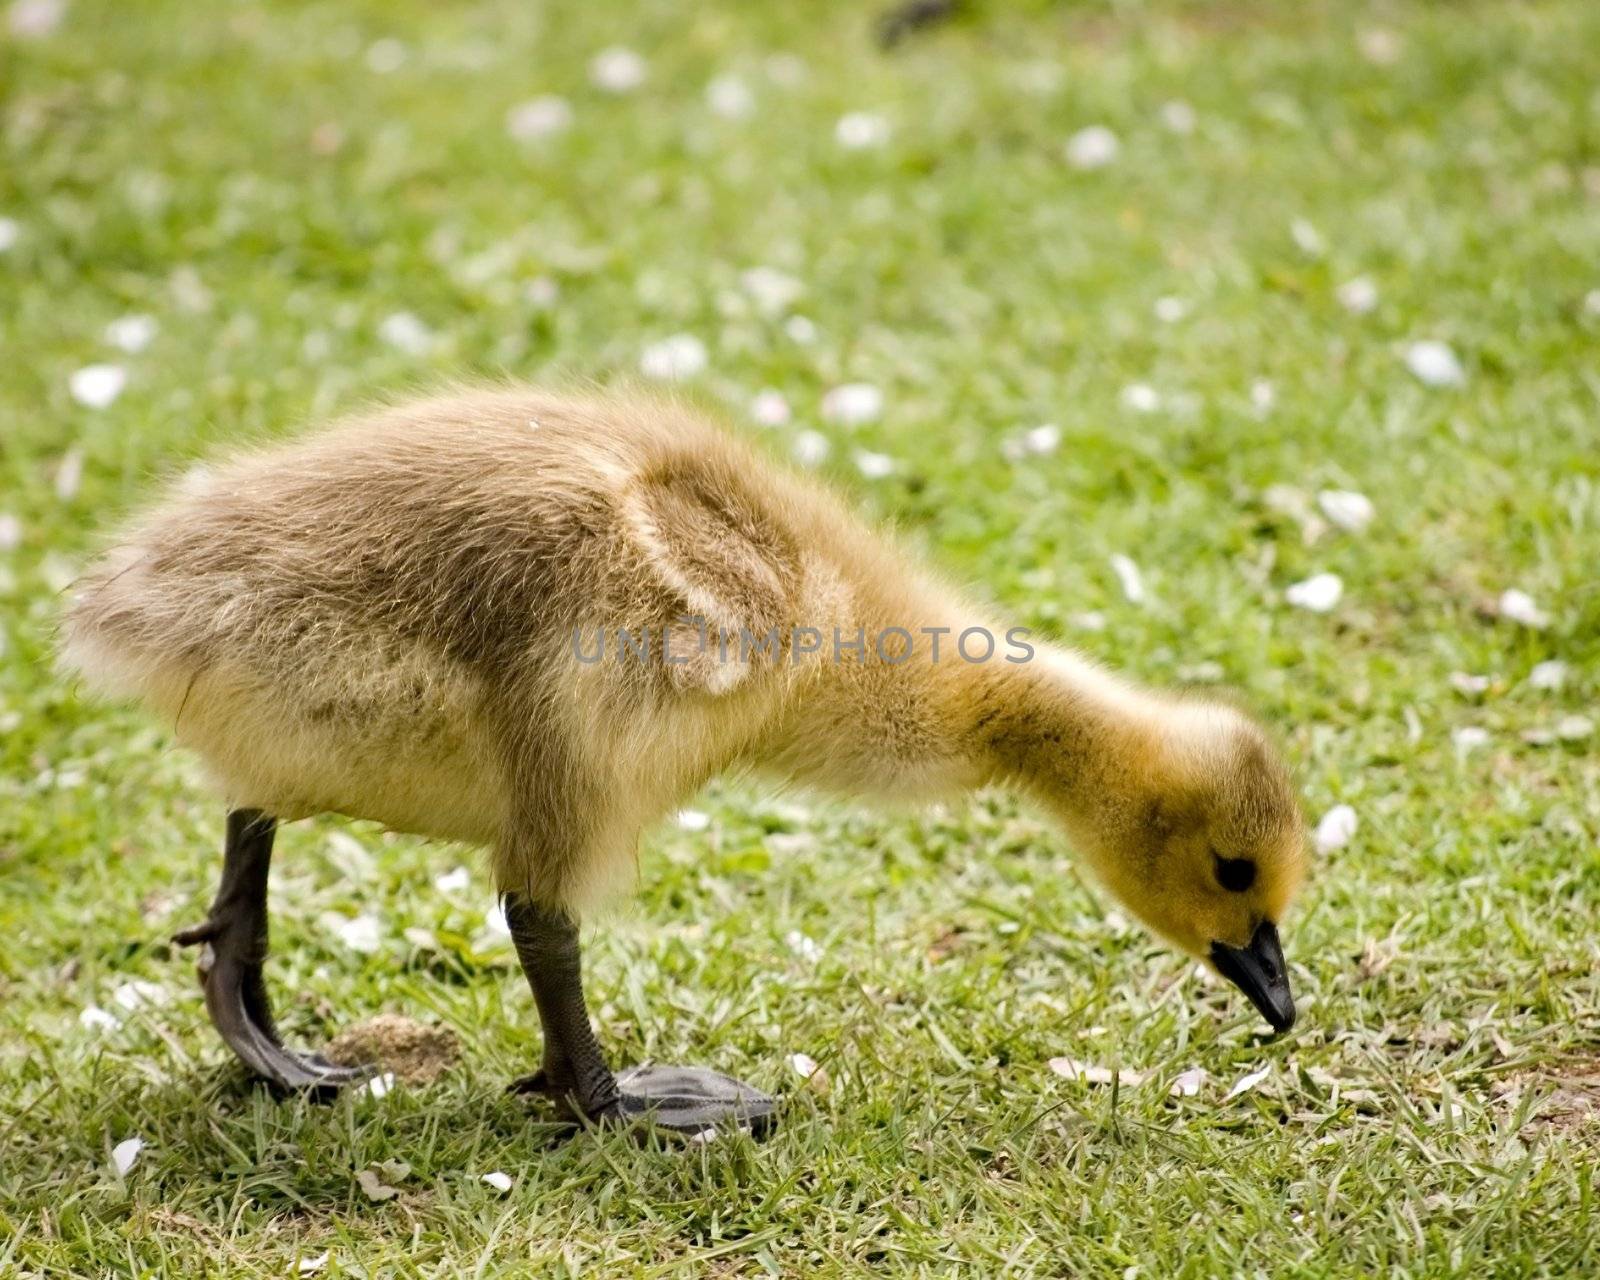 A new born Canada gosse gosling lokking for food on the grass.